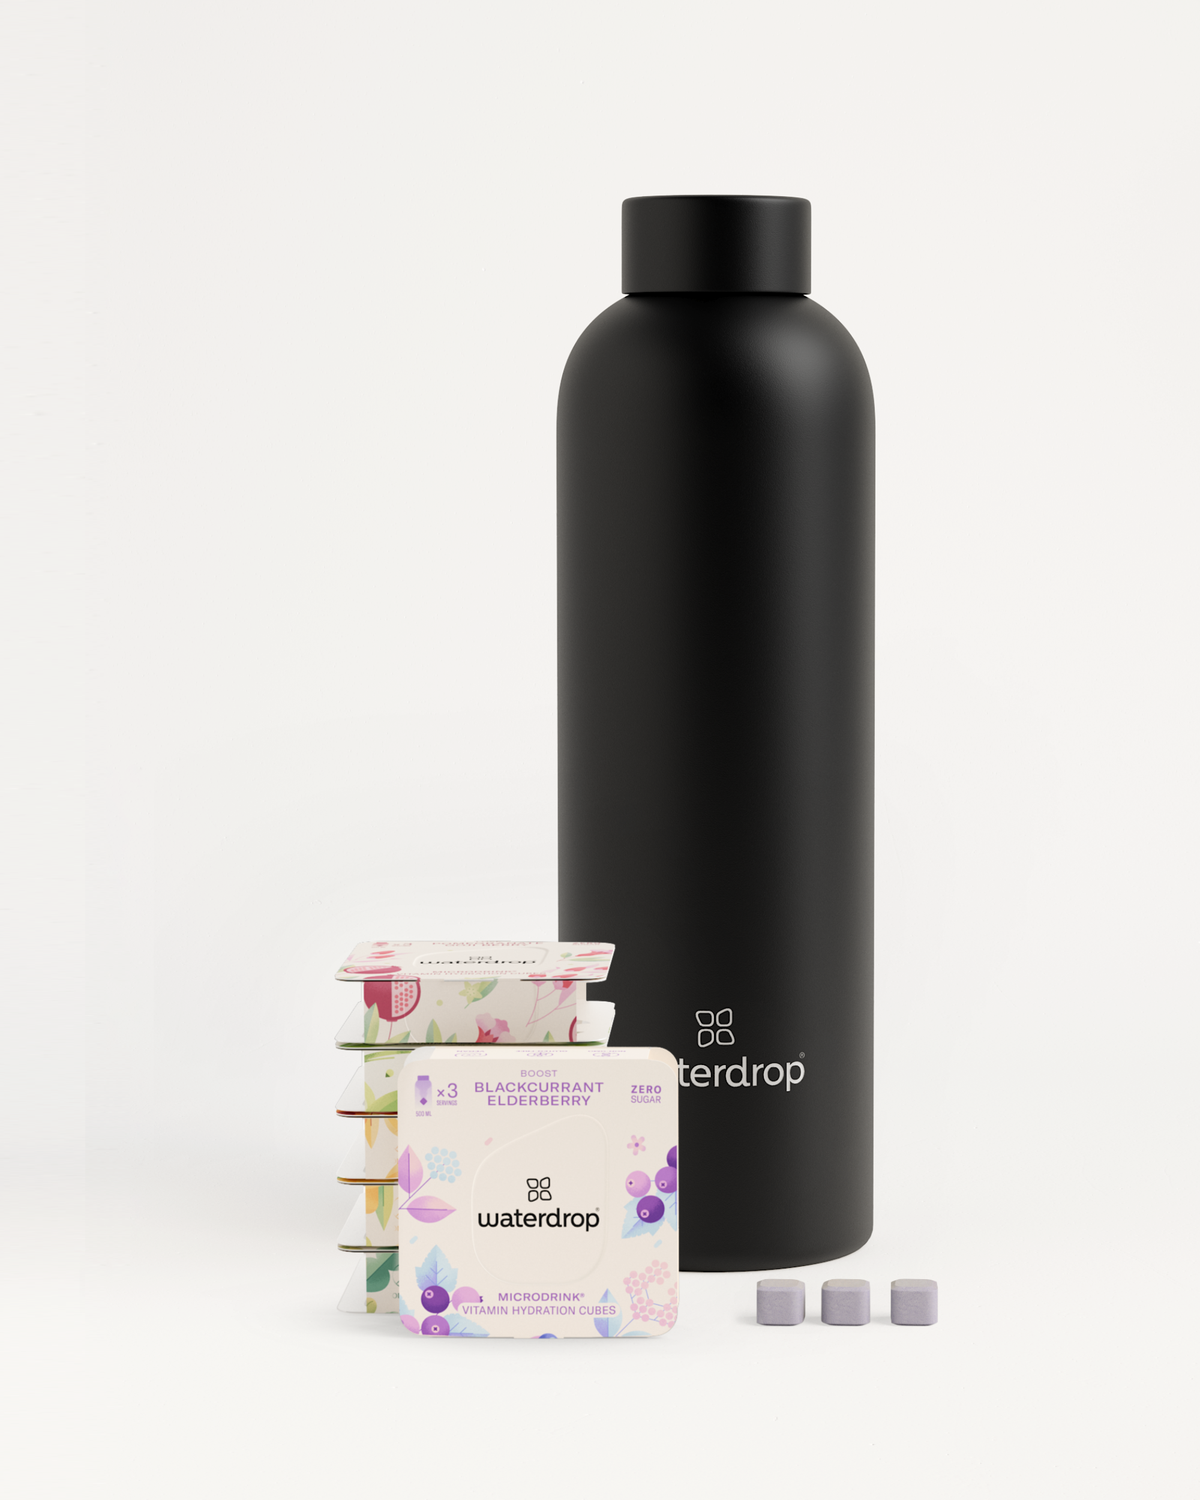 Waterdrop - Official ATP Tour Bottle – 40 Love Lifestyle